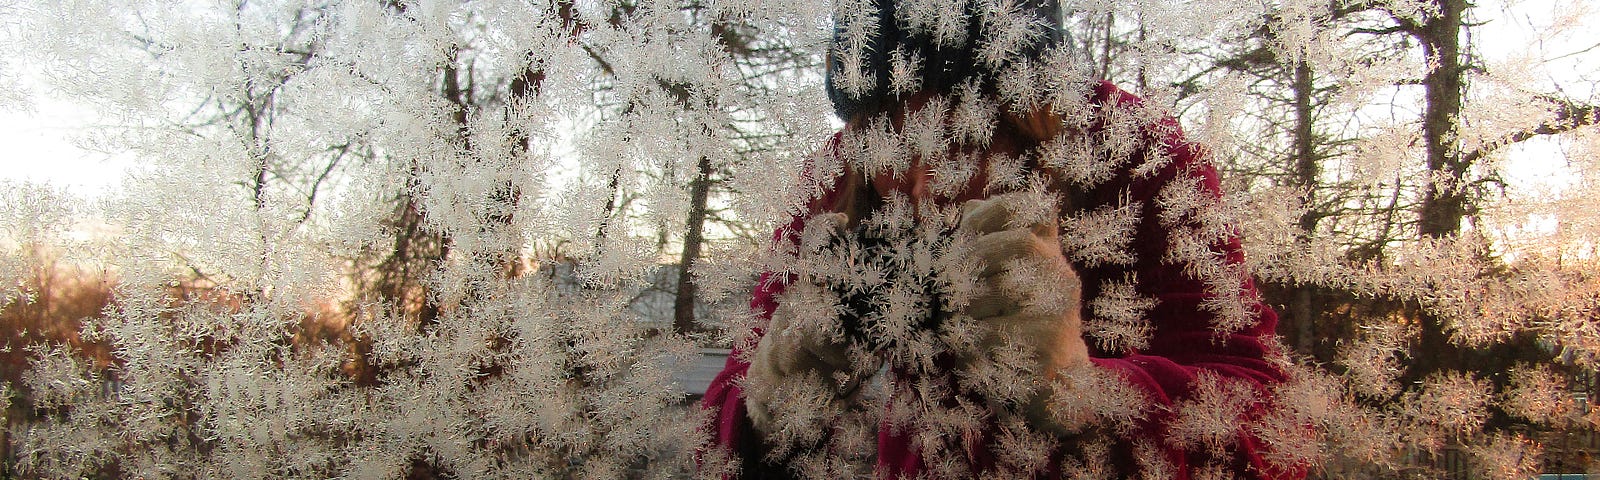 the vague shape of a person reflected in a mirror coated with frost